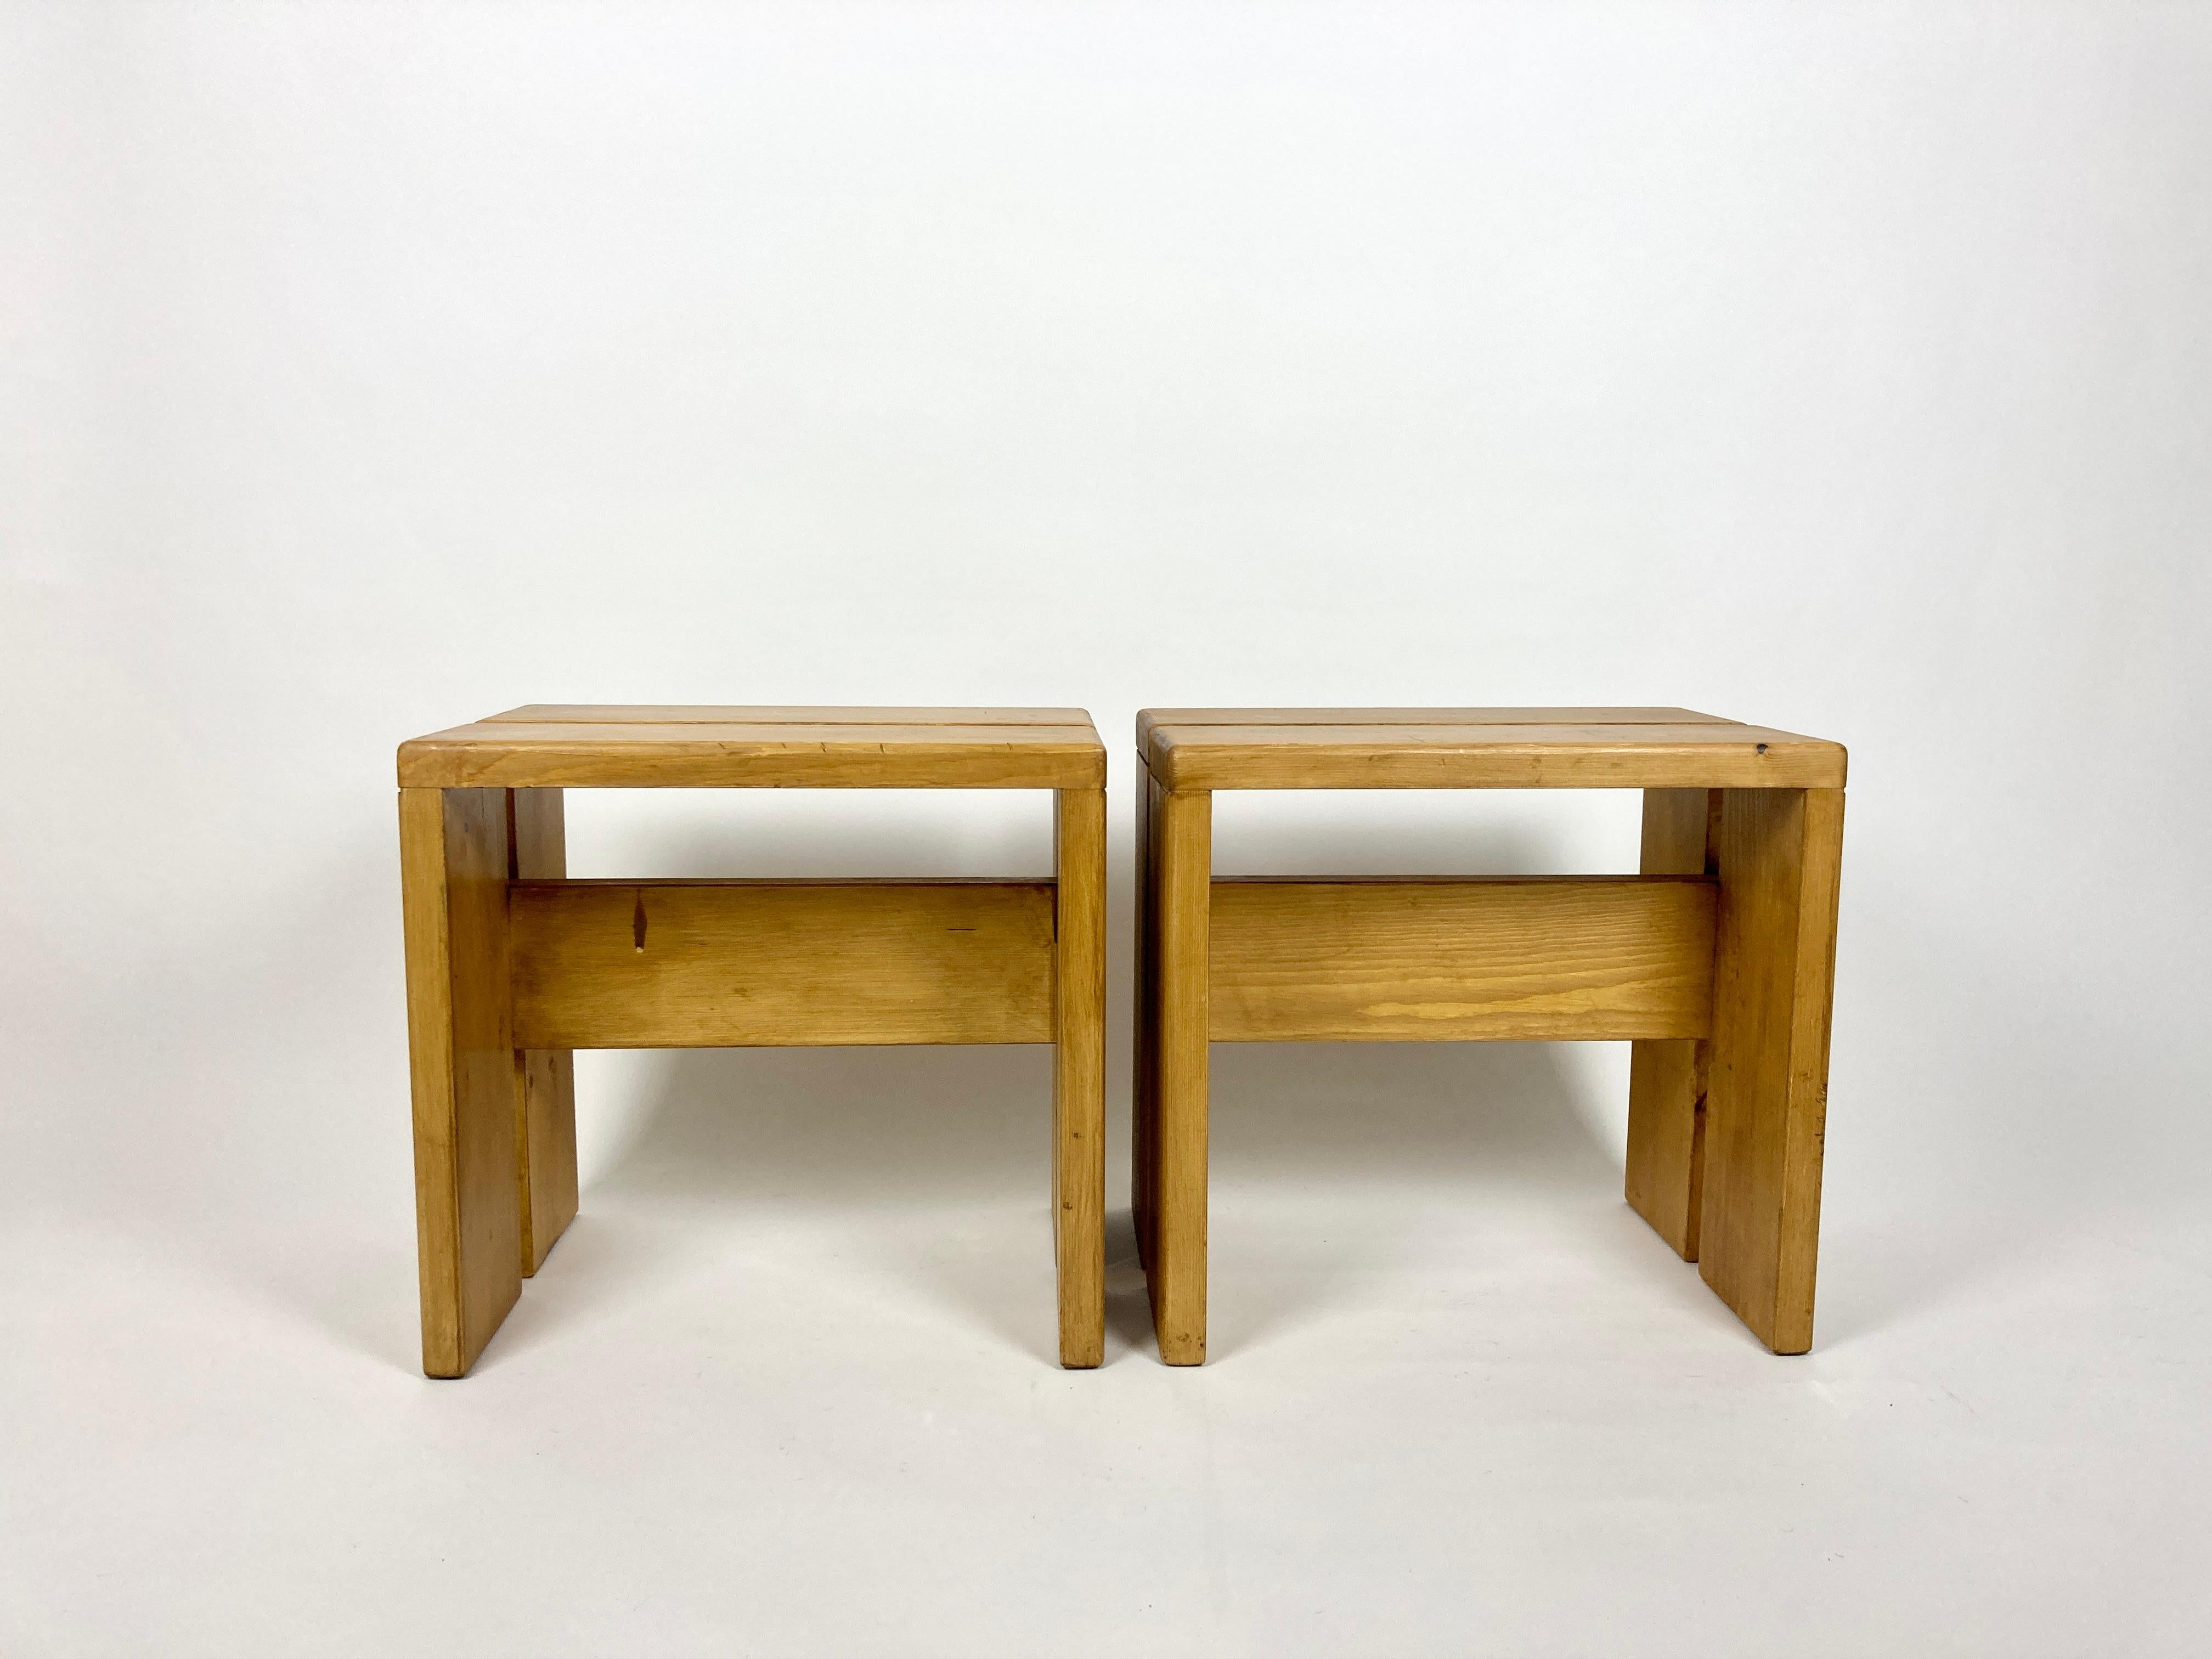 Stool/side tables selected by Charlotte Perriand for the Les Arcs resort. France, 1970s.

Made of pine. No structural damage or old repairs, very solid.

Great original condition with wear and patina as pictured, nice rich wood tone. Cleaned,